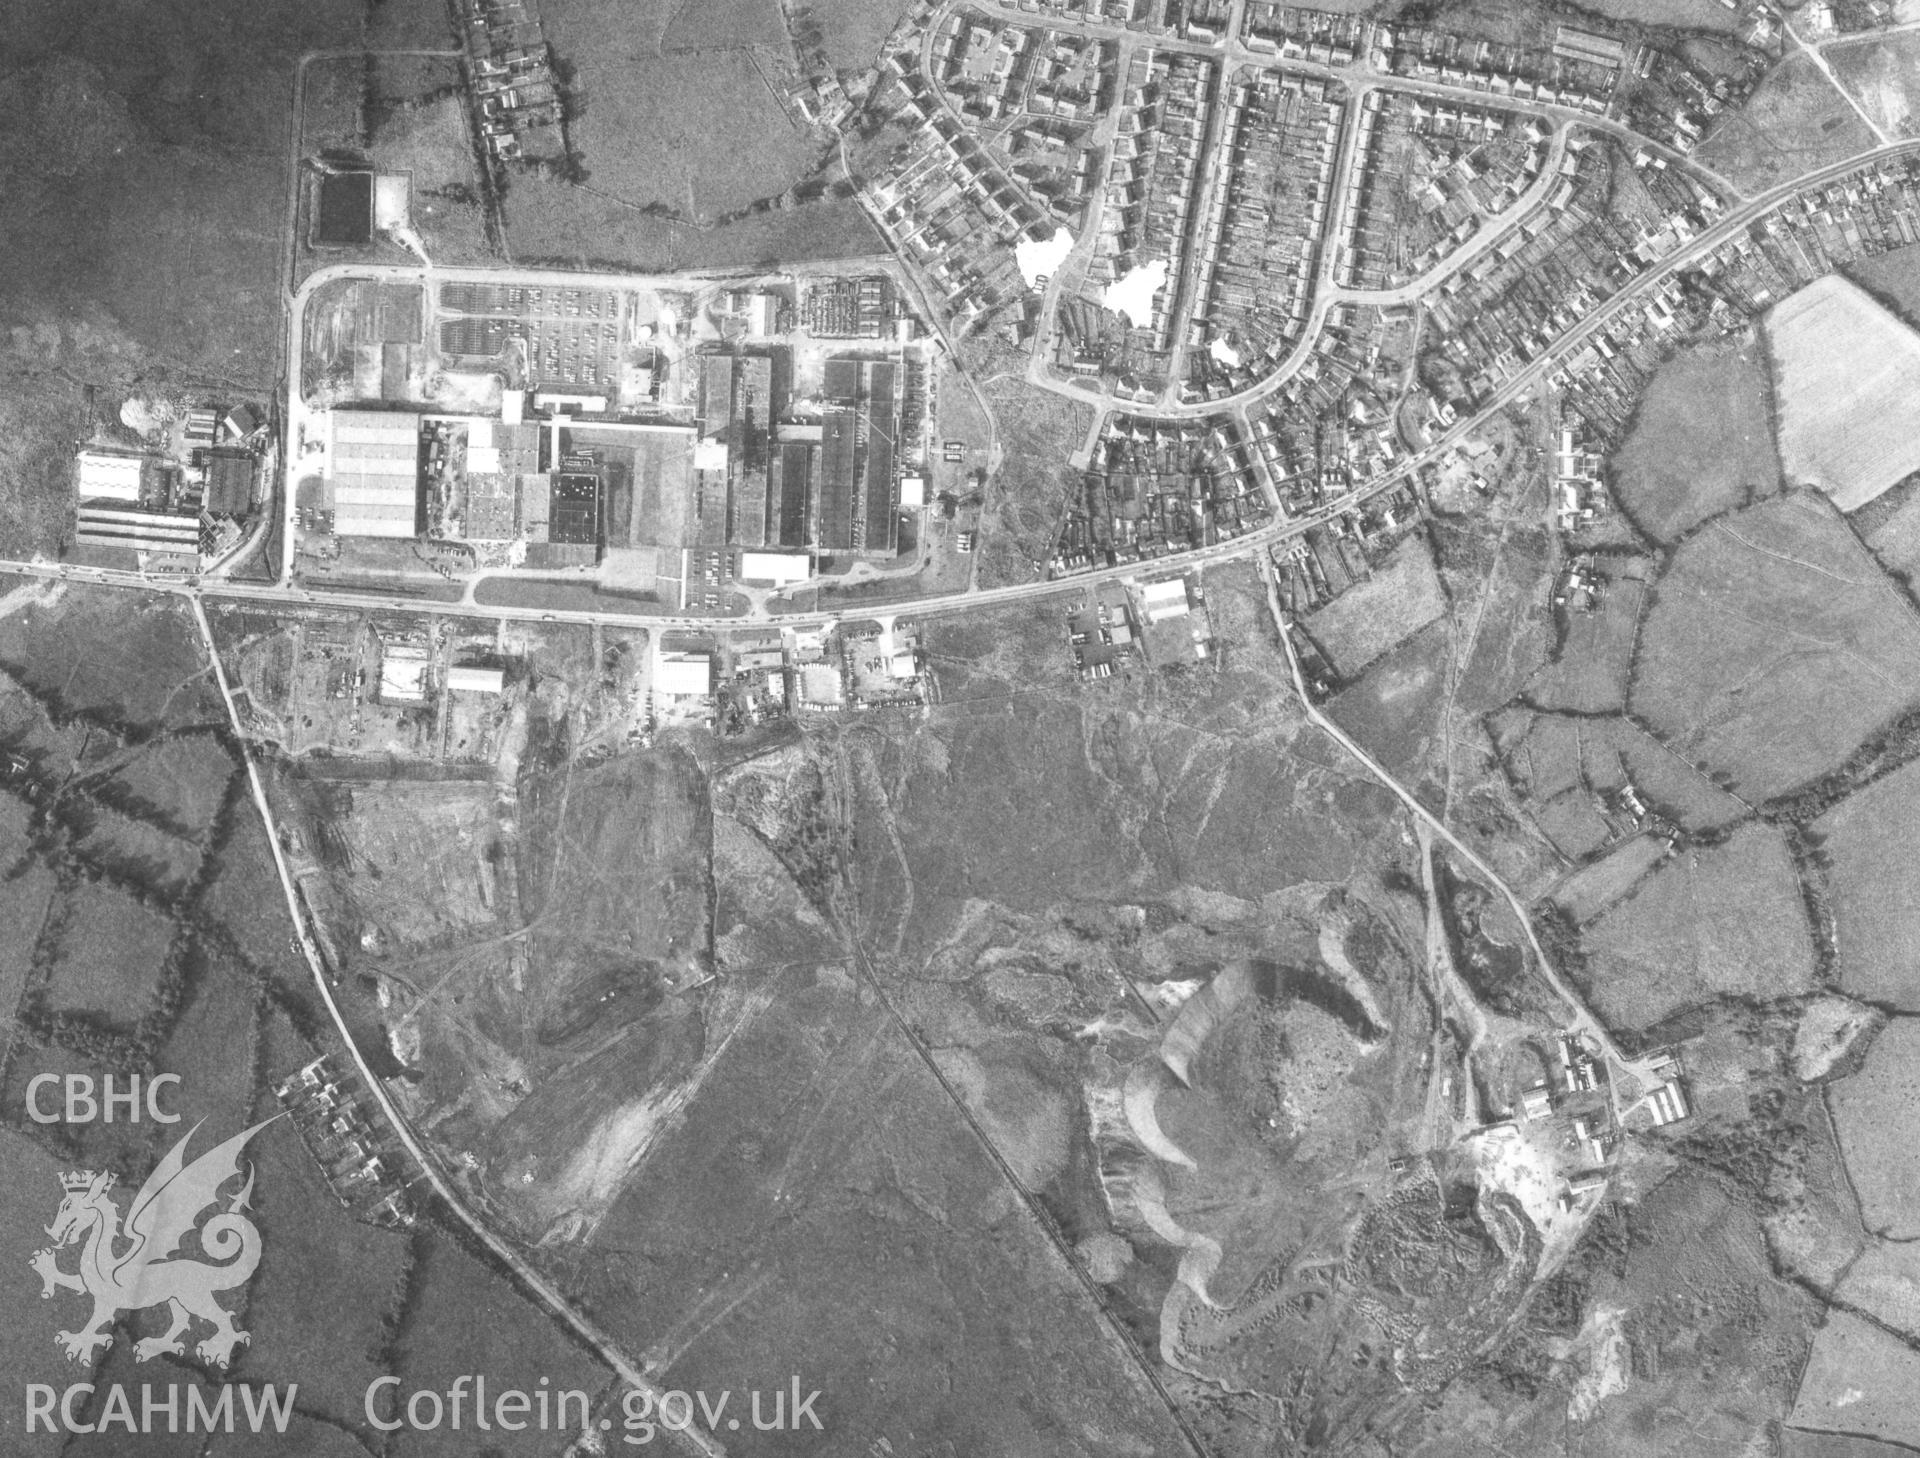 Black and white aerial photograph taken in 1970. Part of material used in a Setting Impact Assessment of Land off Phoenix Way, Garngoch Business Village, Swansea, carried out by Archaeology Wales, 2018. Project number P2631.